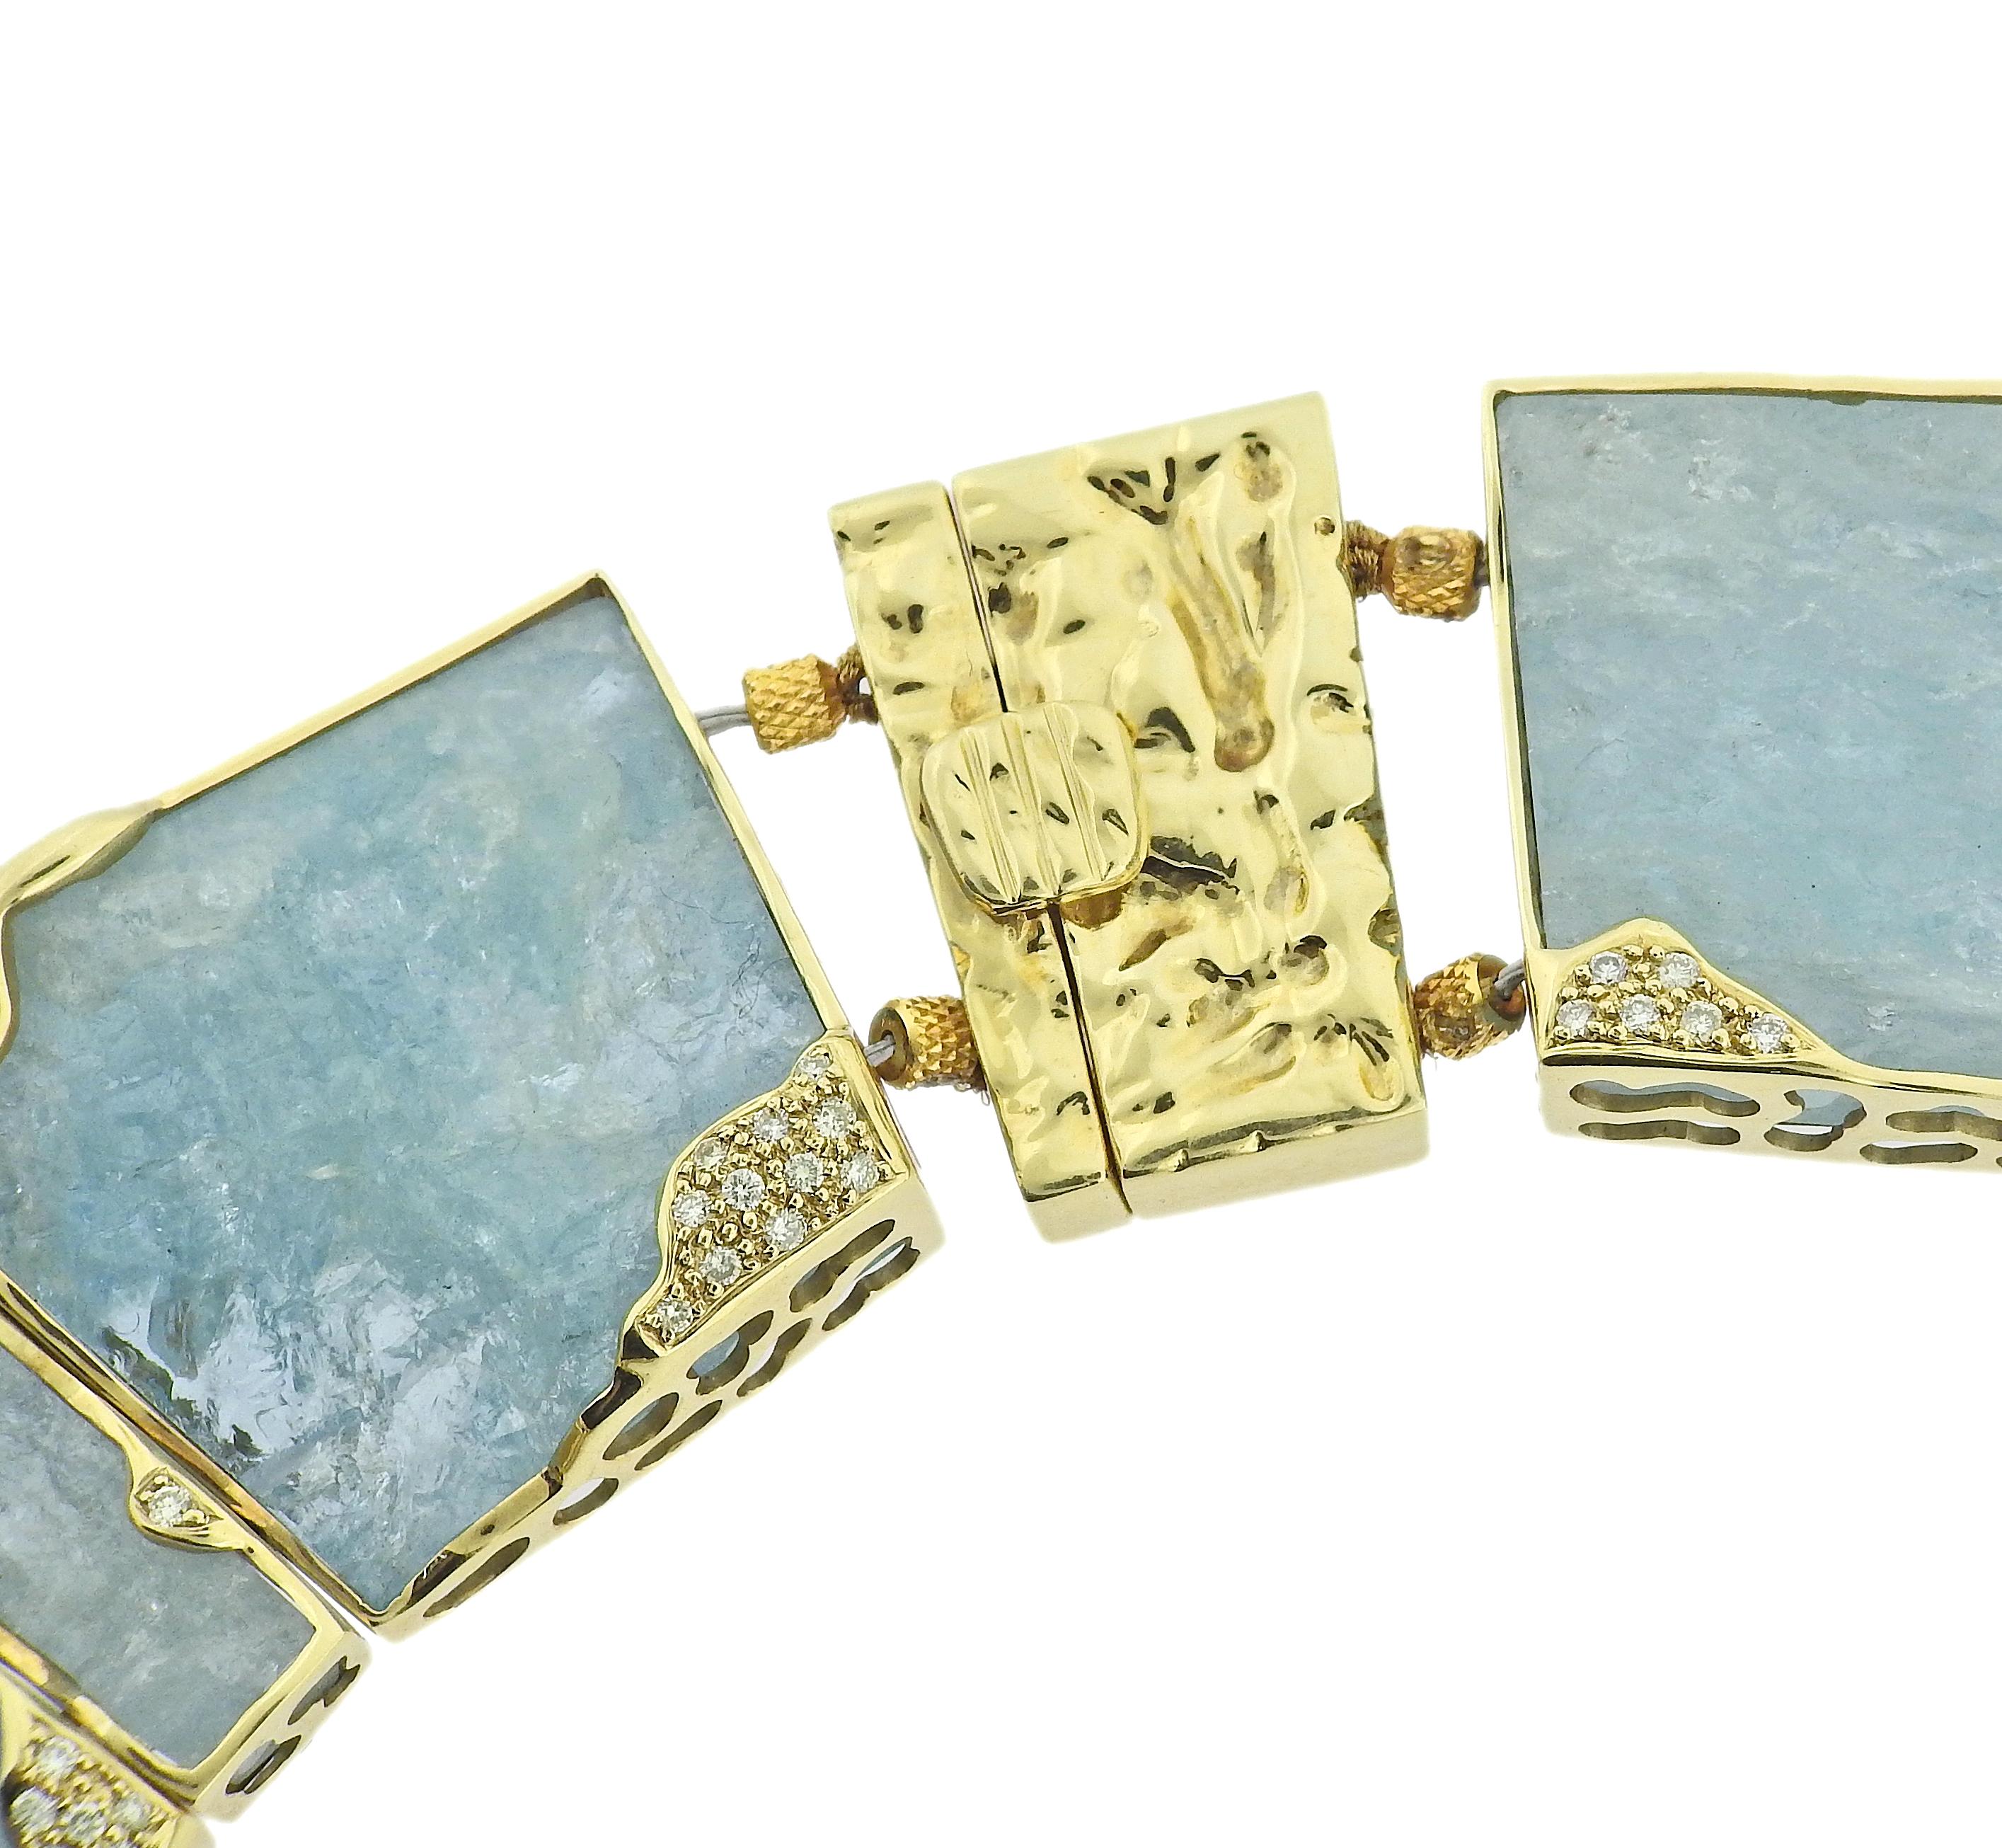 Exclusive craftmanship hammered necklace set with 1,305ctw natural aquamarine and 4.20ctw in VS/H diamonds, designed for Winc. Necklace is 5 5/8